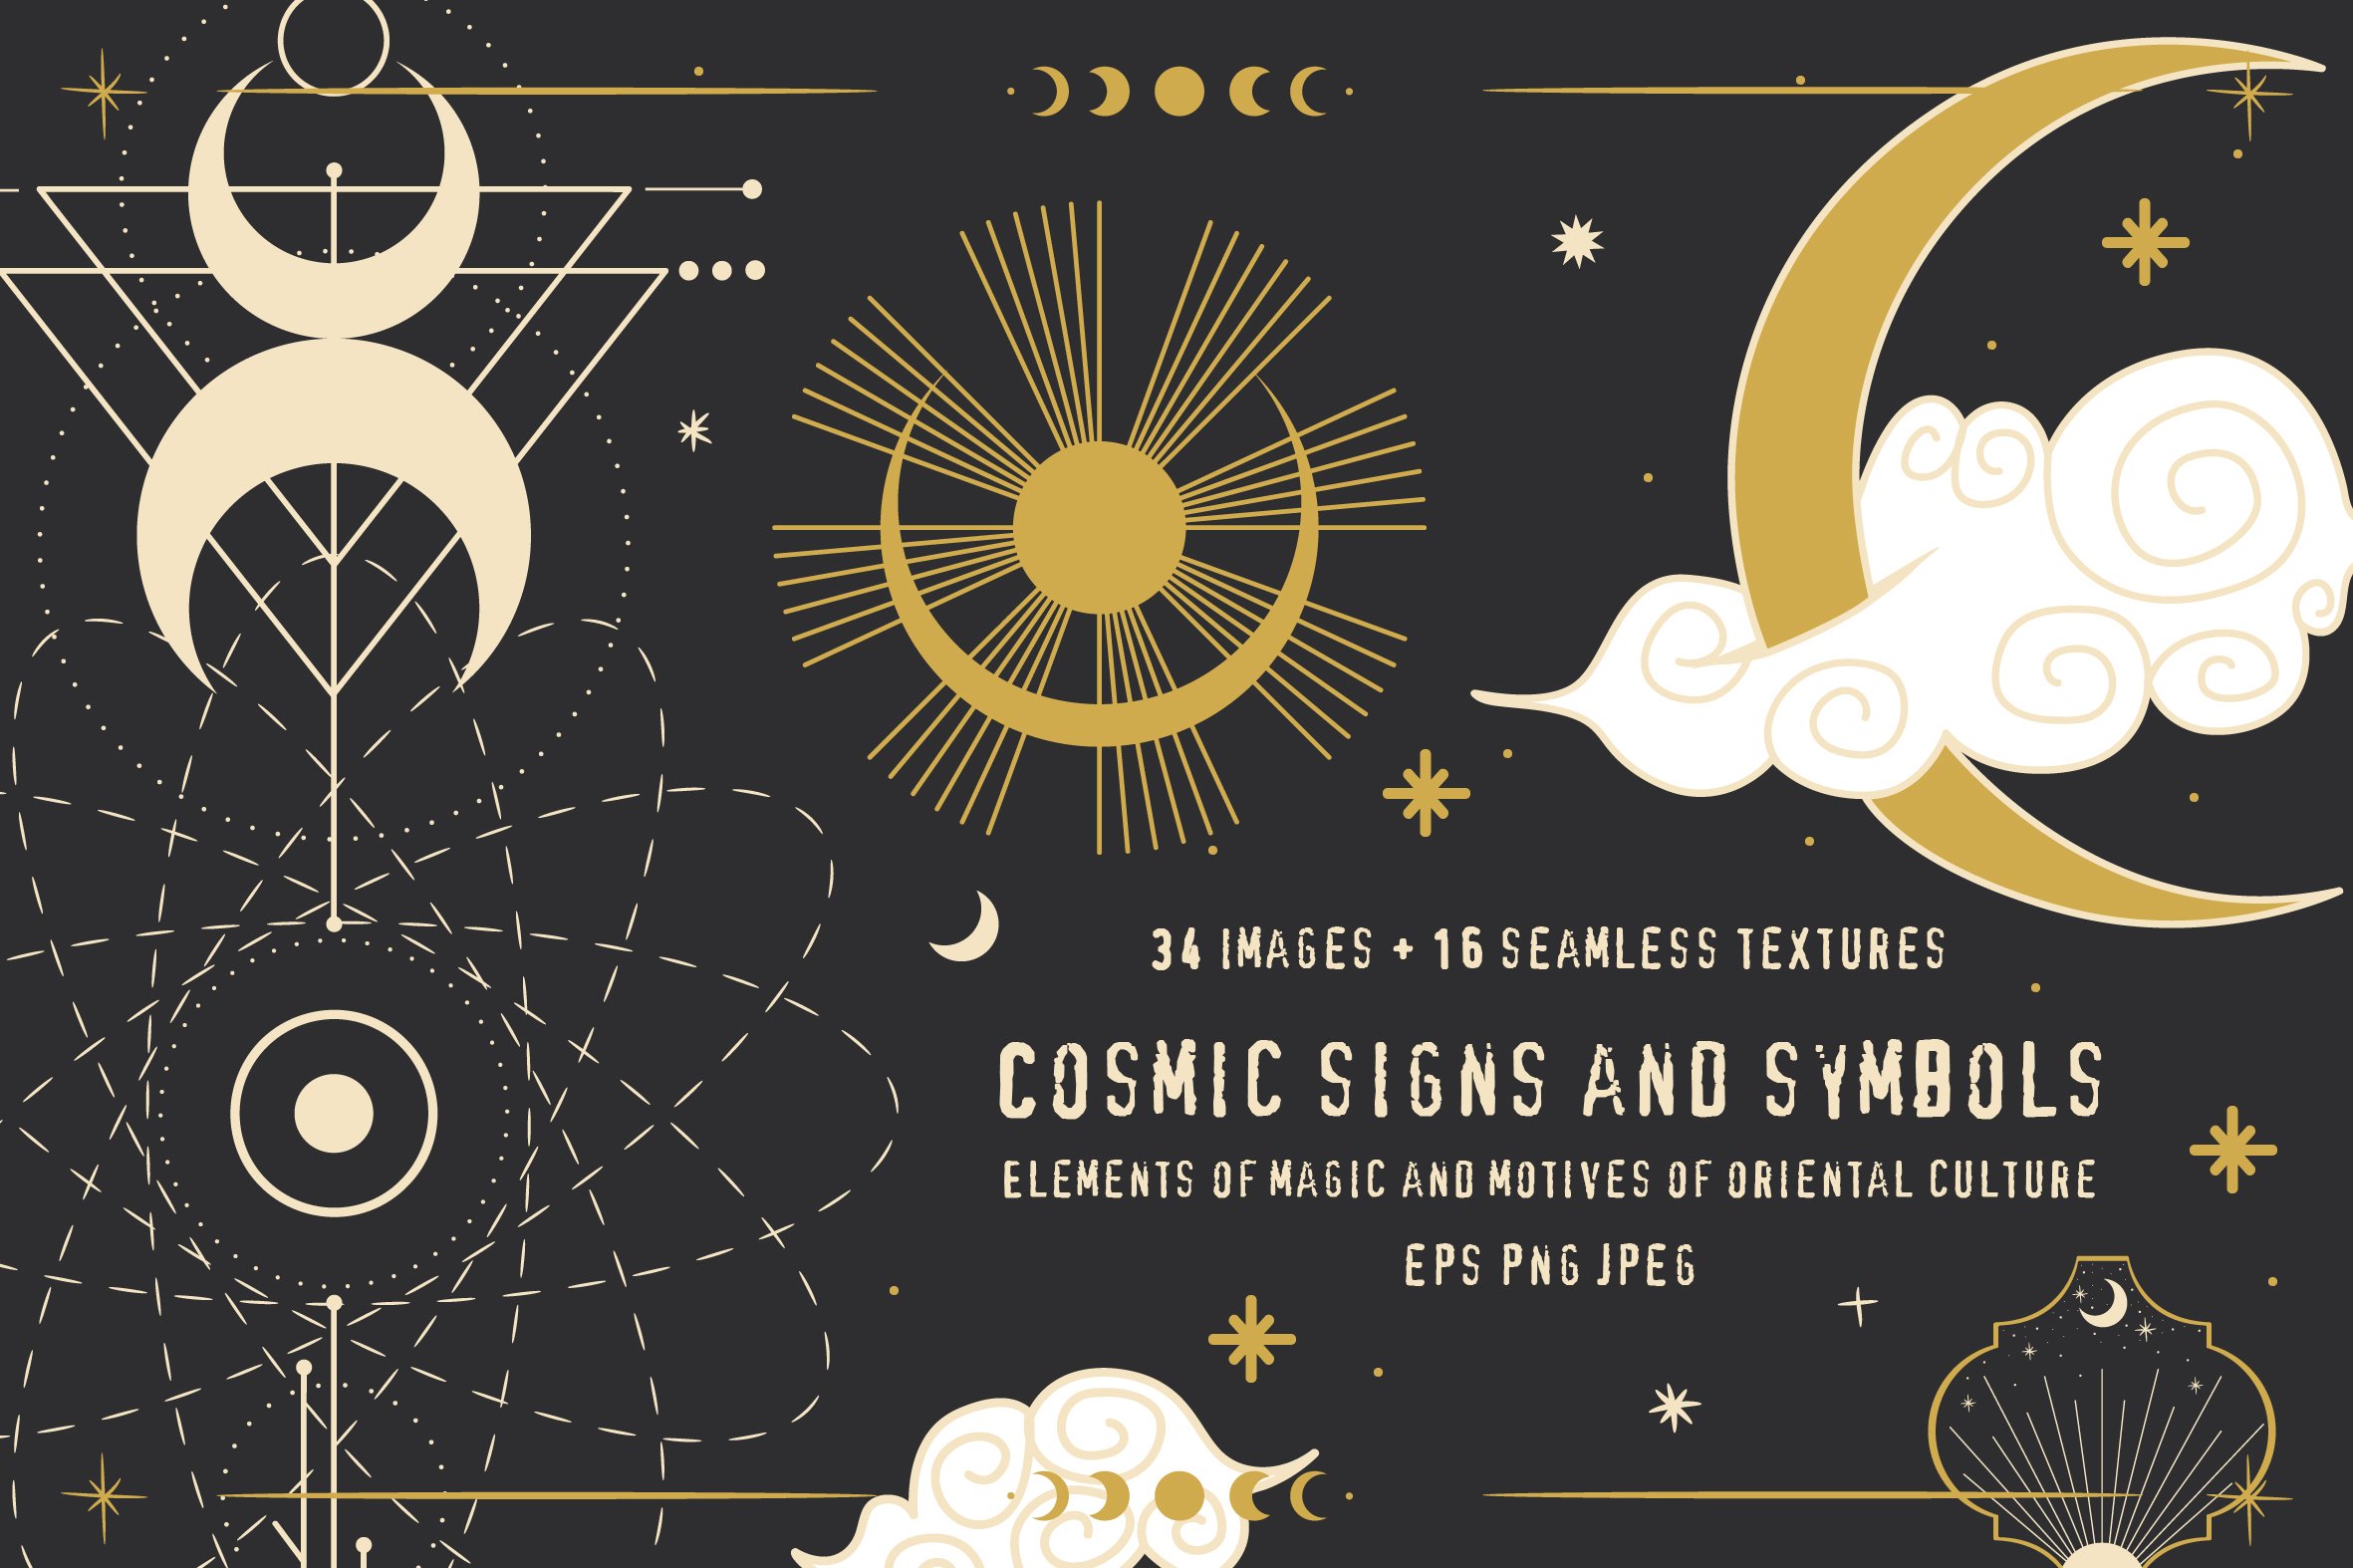 Cosmic signs and symbols cover image.